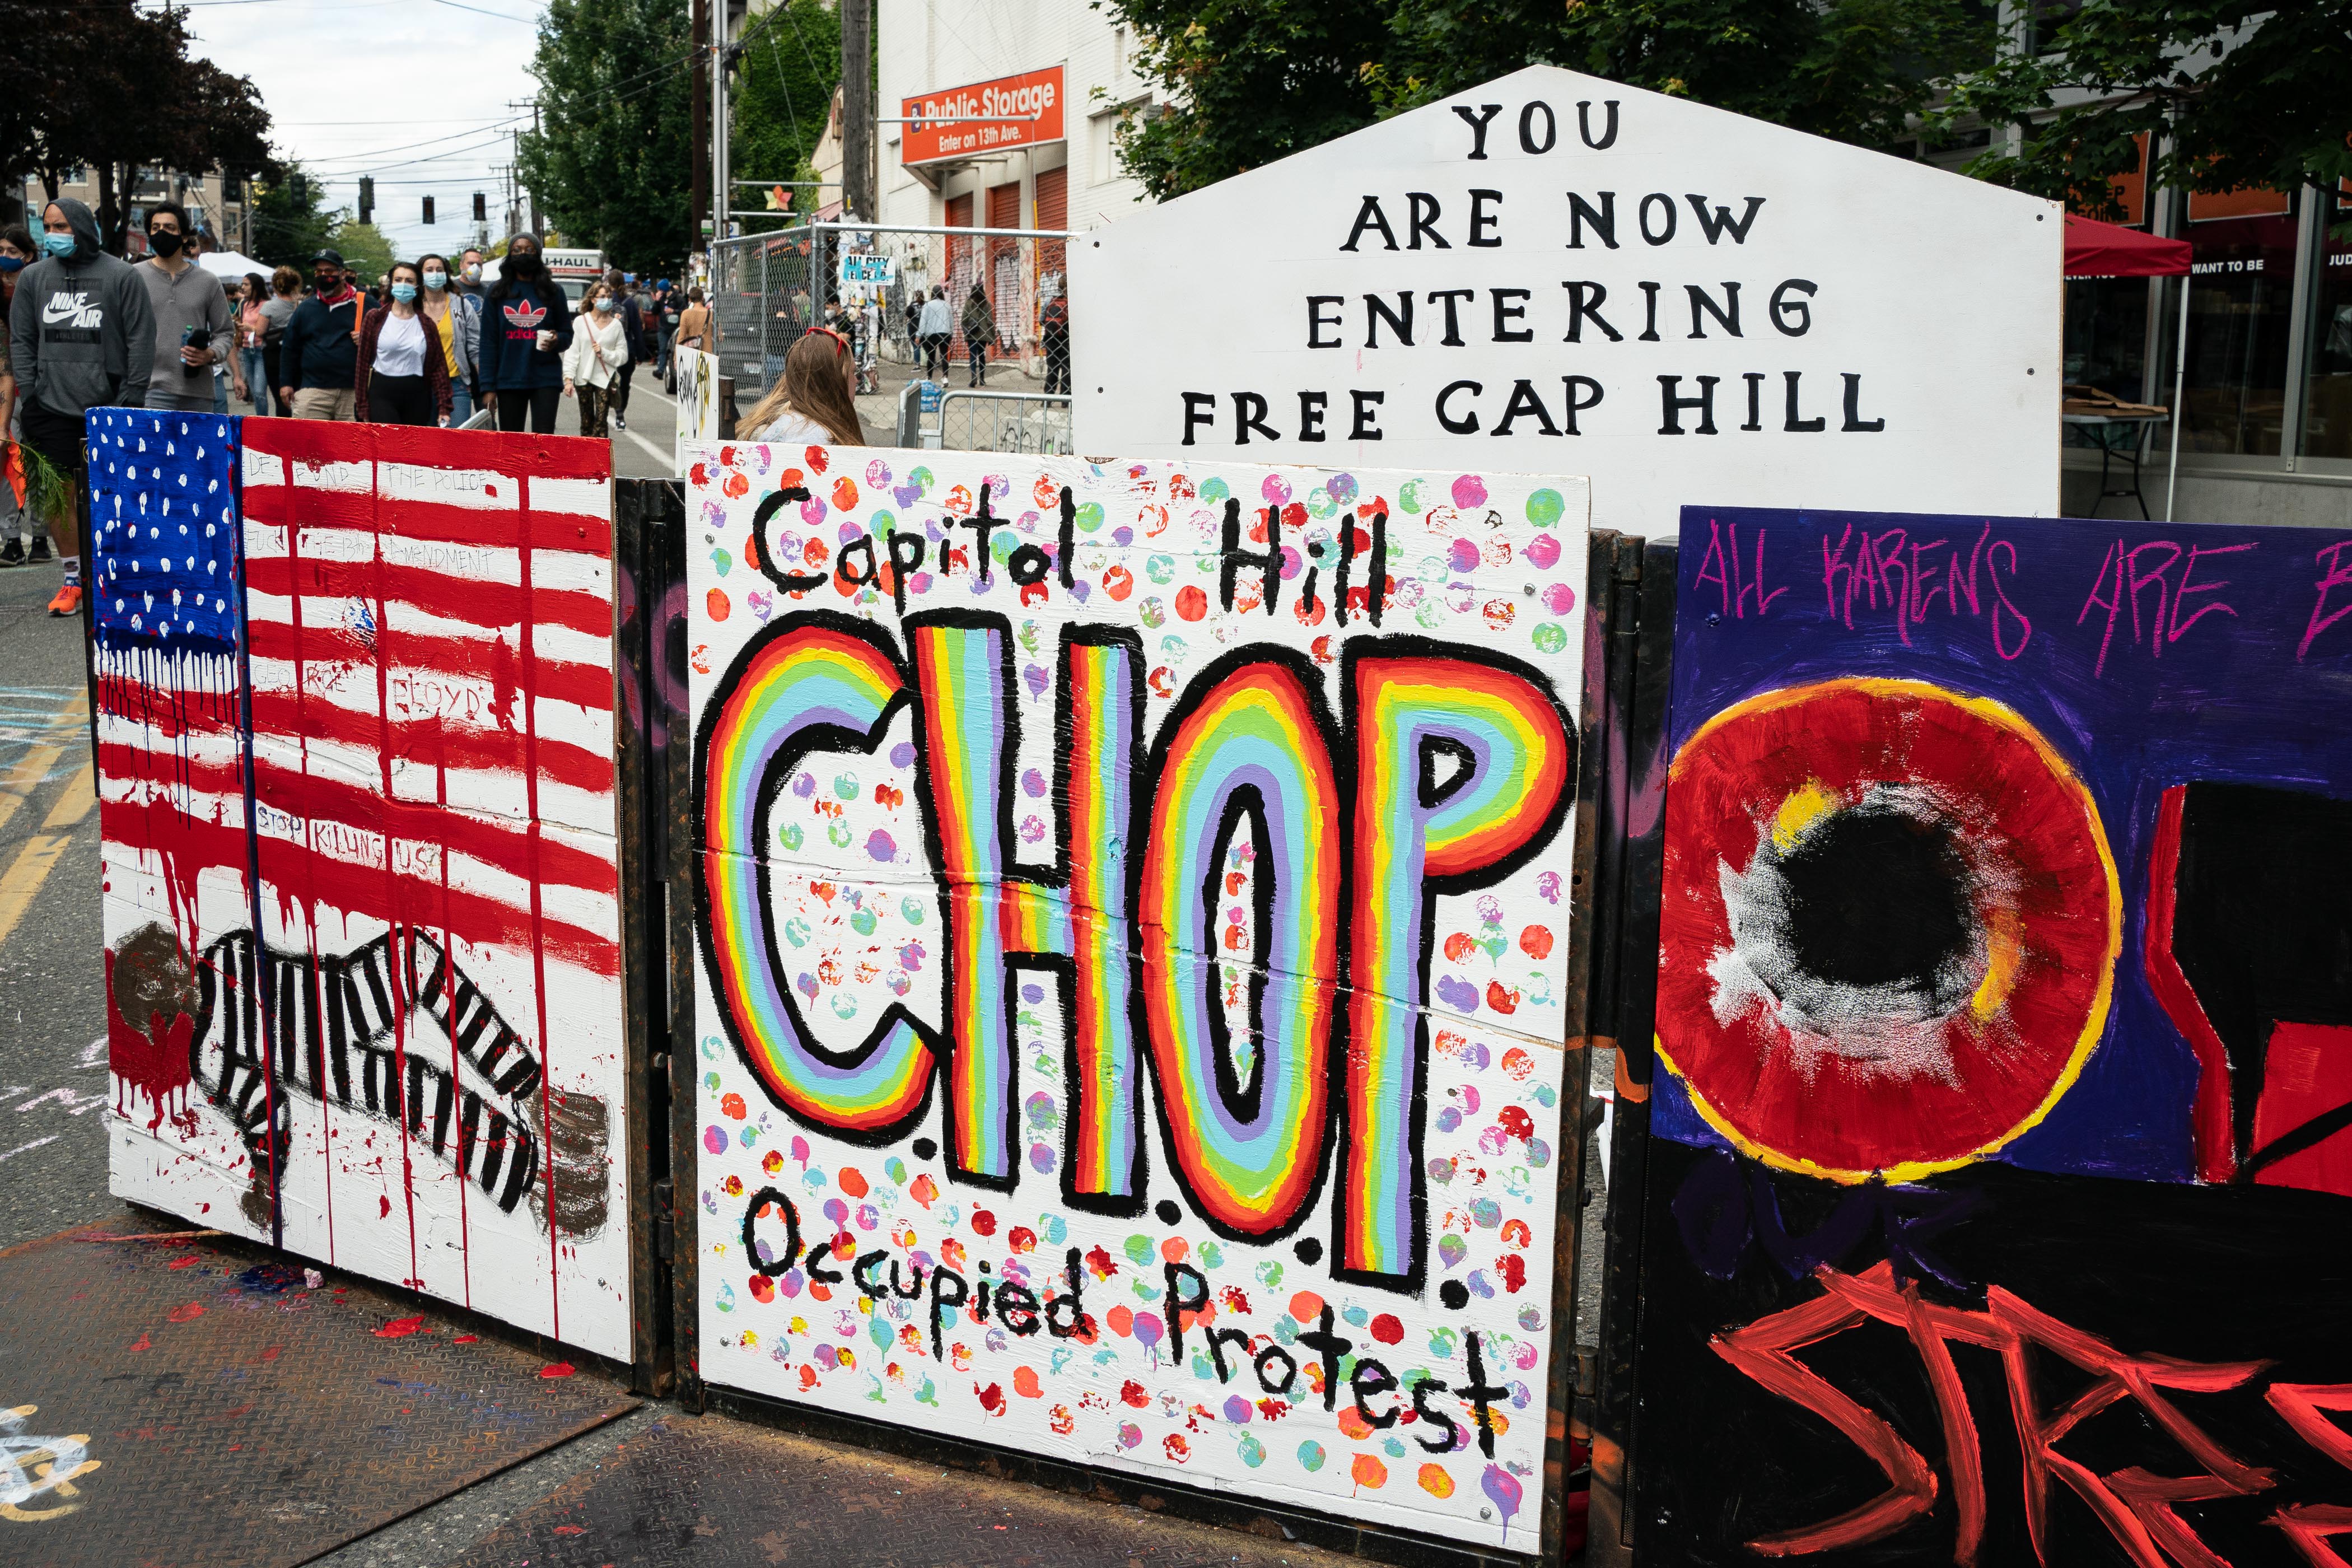 A signs reads "Capitol Hill Occupied Protest" in area that has been referred to by protesters by that name as well as "Capitol Hill Organized Protest, or CHOP, on June 14, 2020 in Seattle, Washington. (David Ryder/Getty Images)